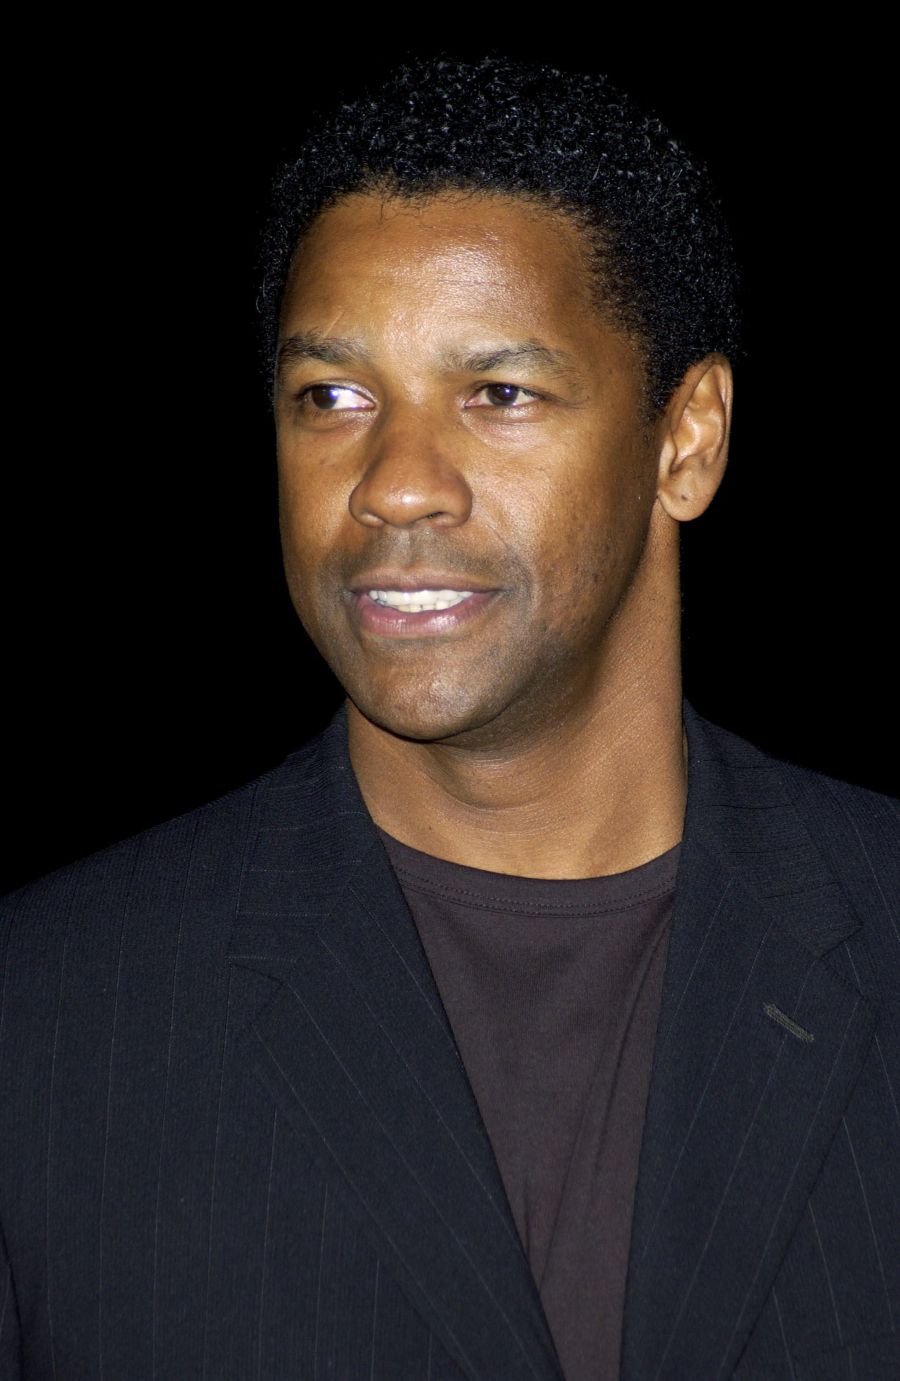 Then & Now Denzel Washington Over The Years [PHOTOS] 100.3